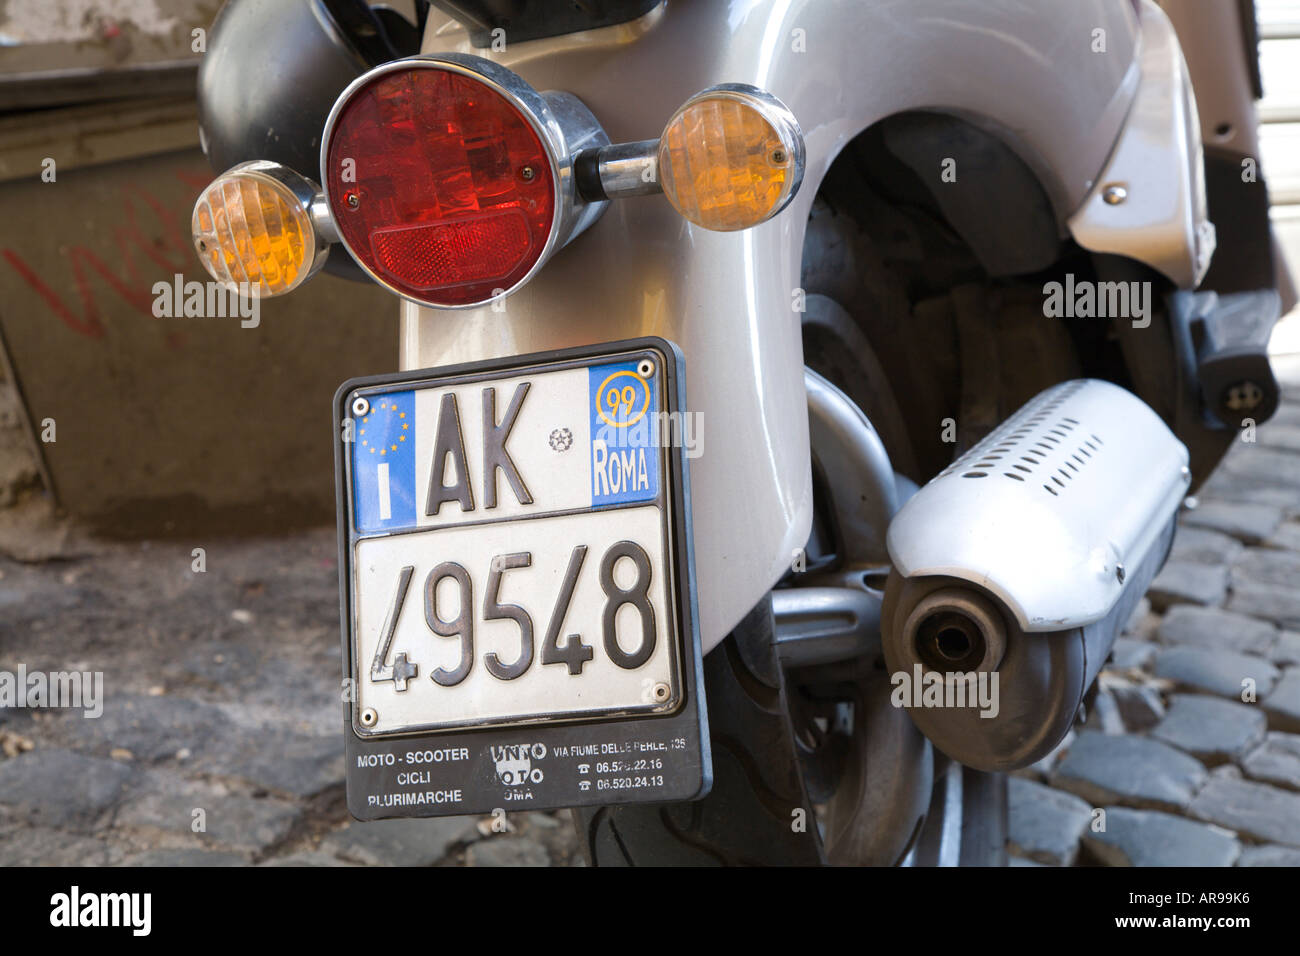 The favoured mode of transport in Rome the motor scooter Stock Photo